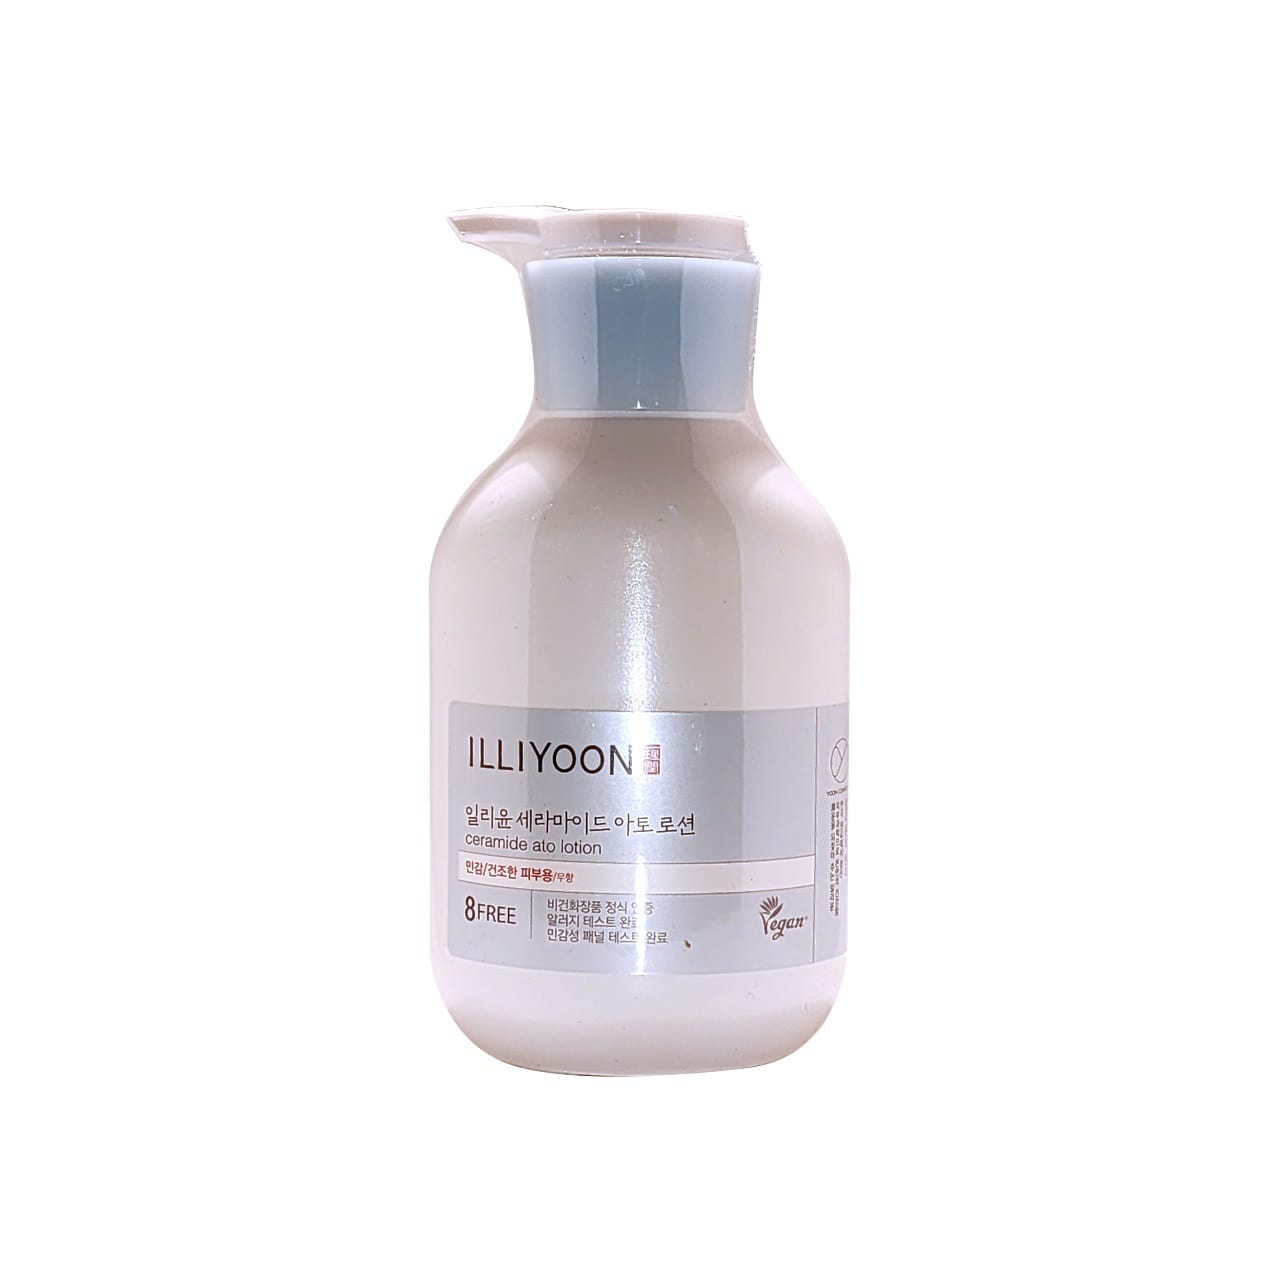 Product label for Illiyoon Ceramide Ato Lotion (350 mL)